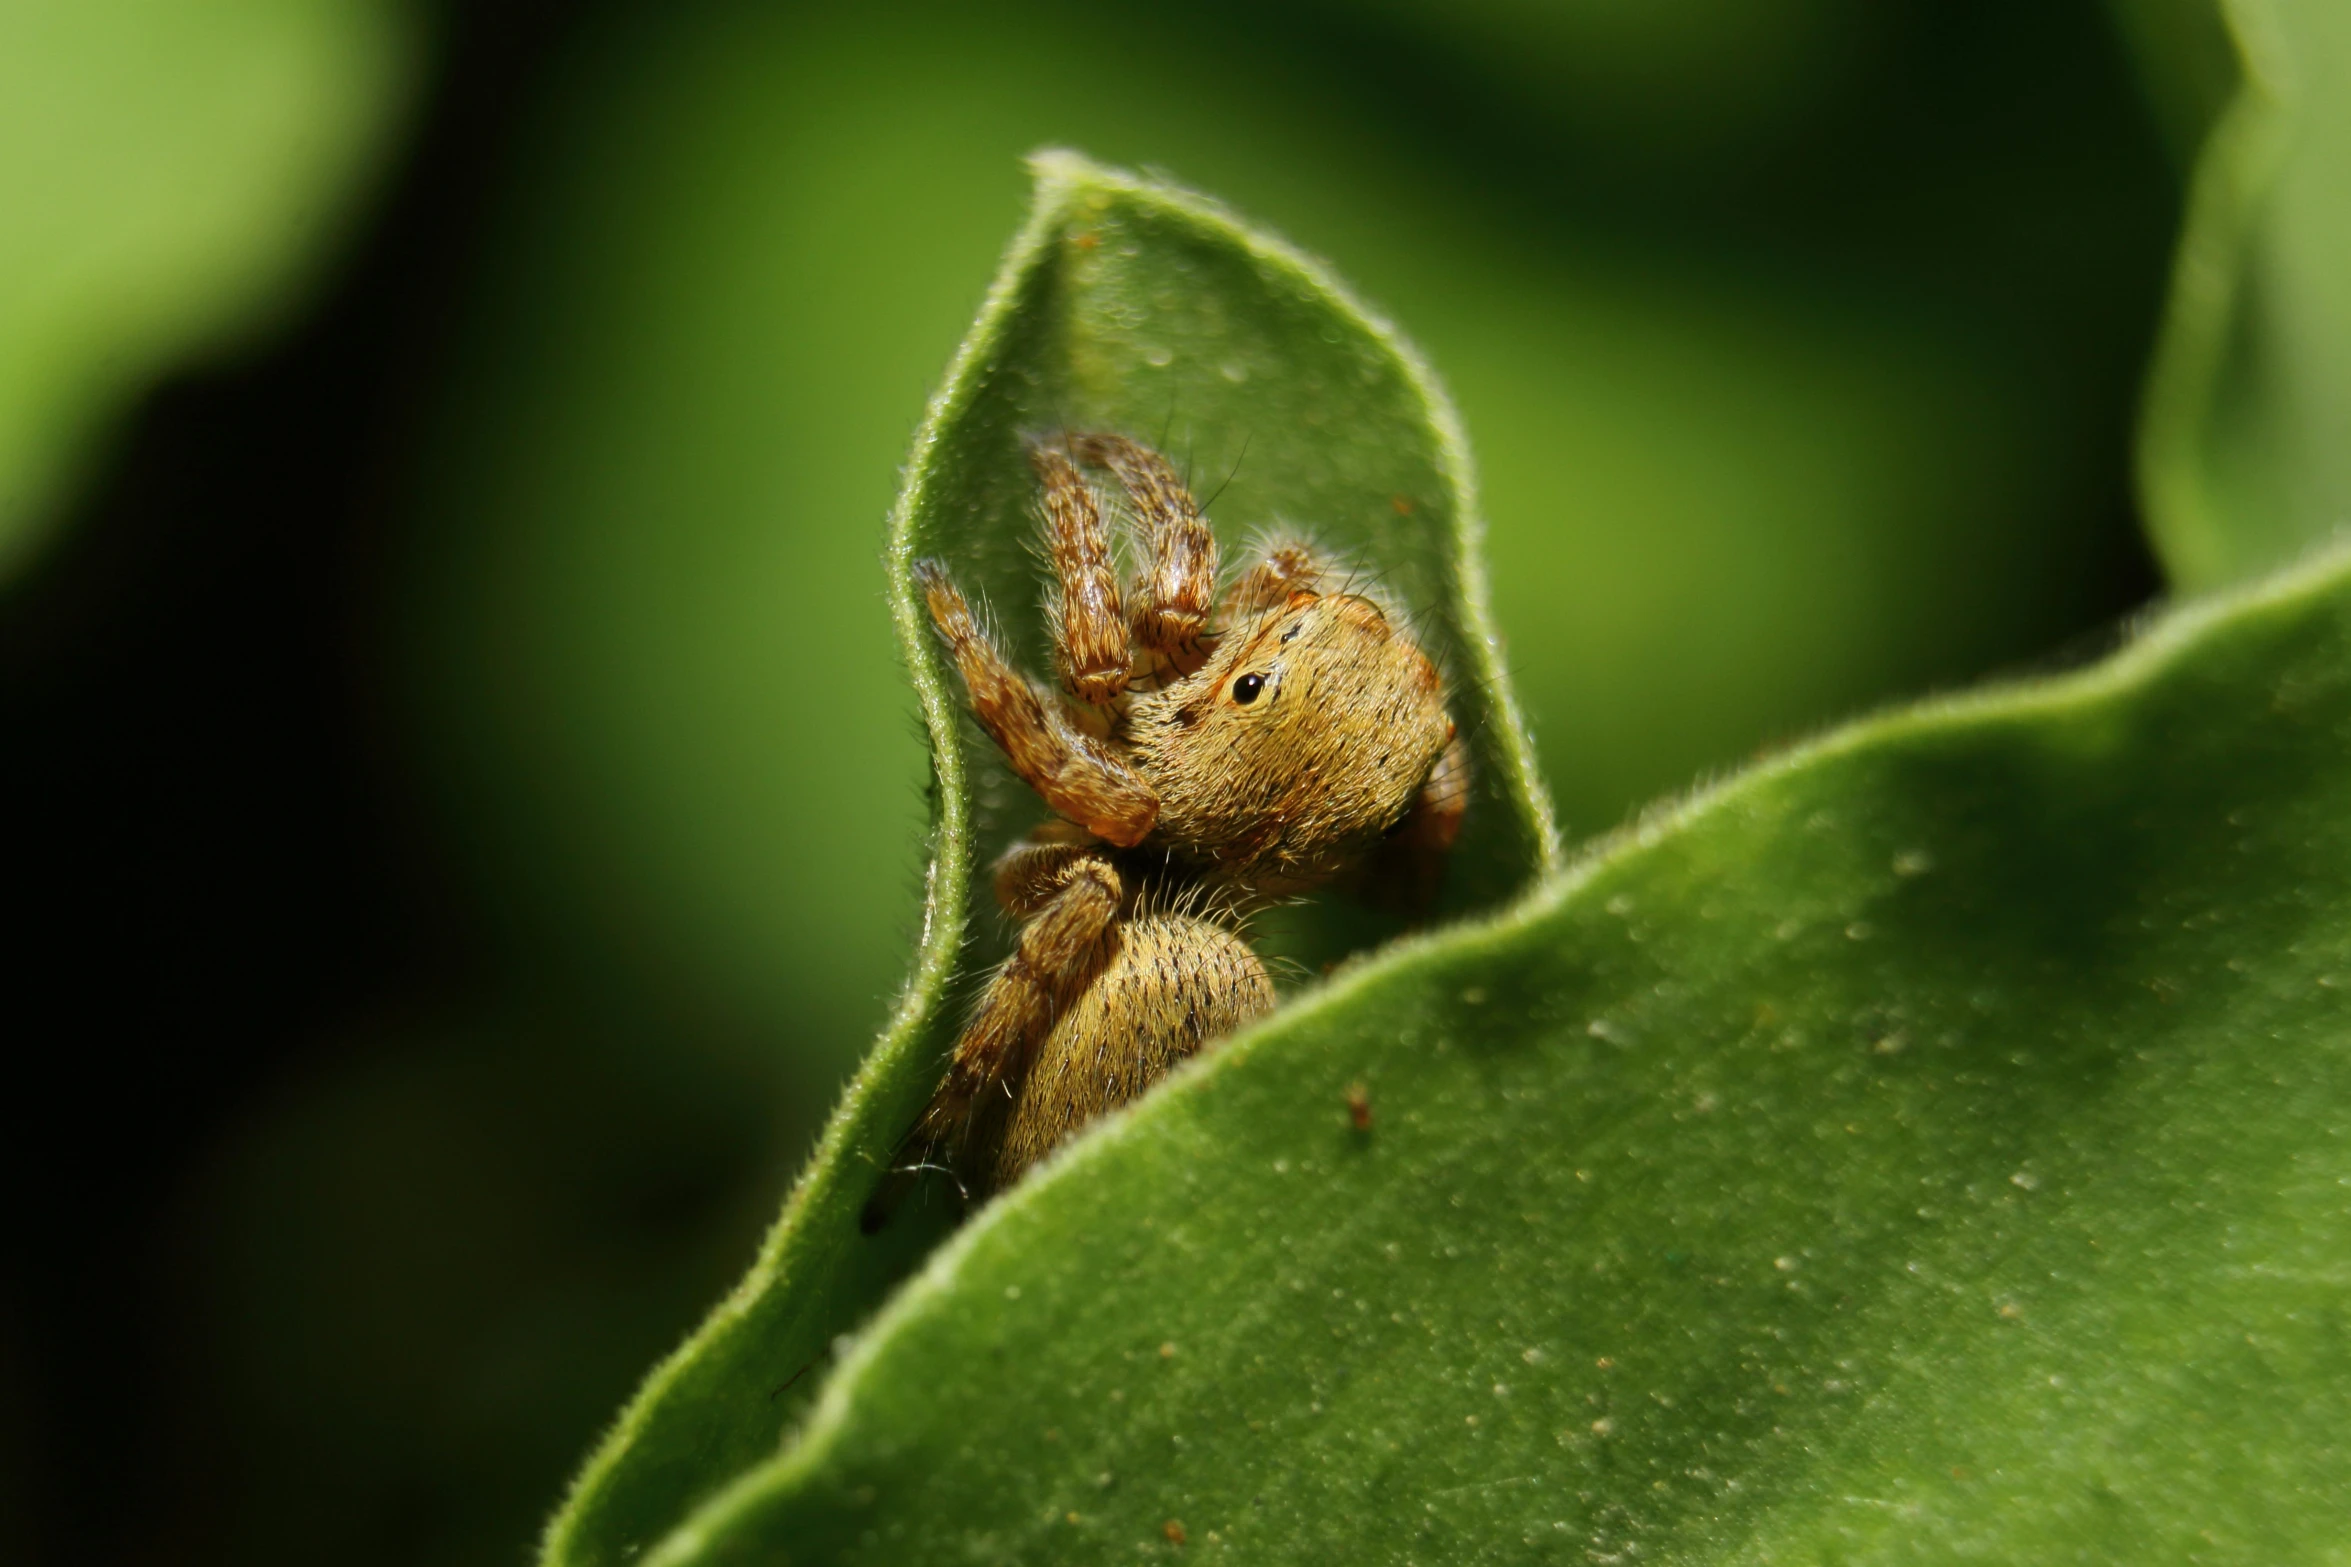 the small yellow spider is perched on the leaf